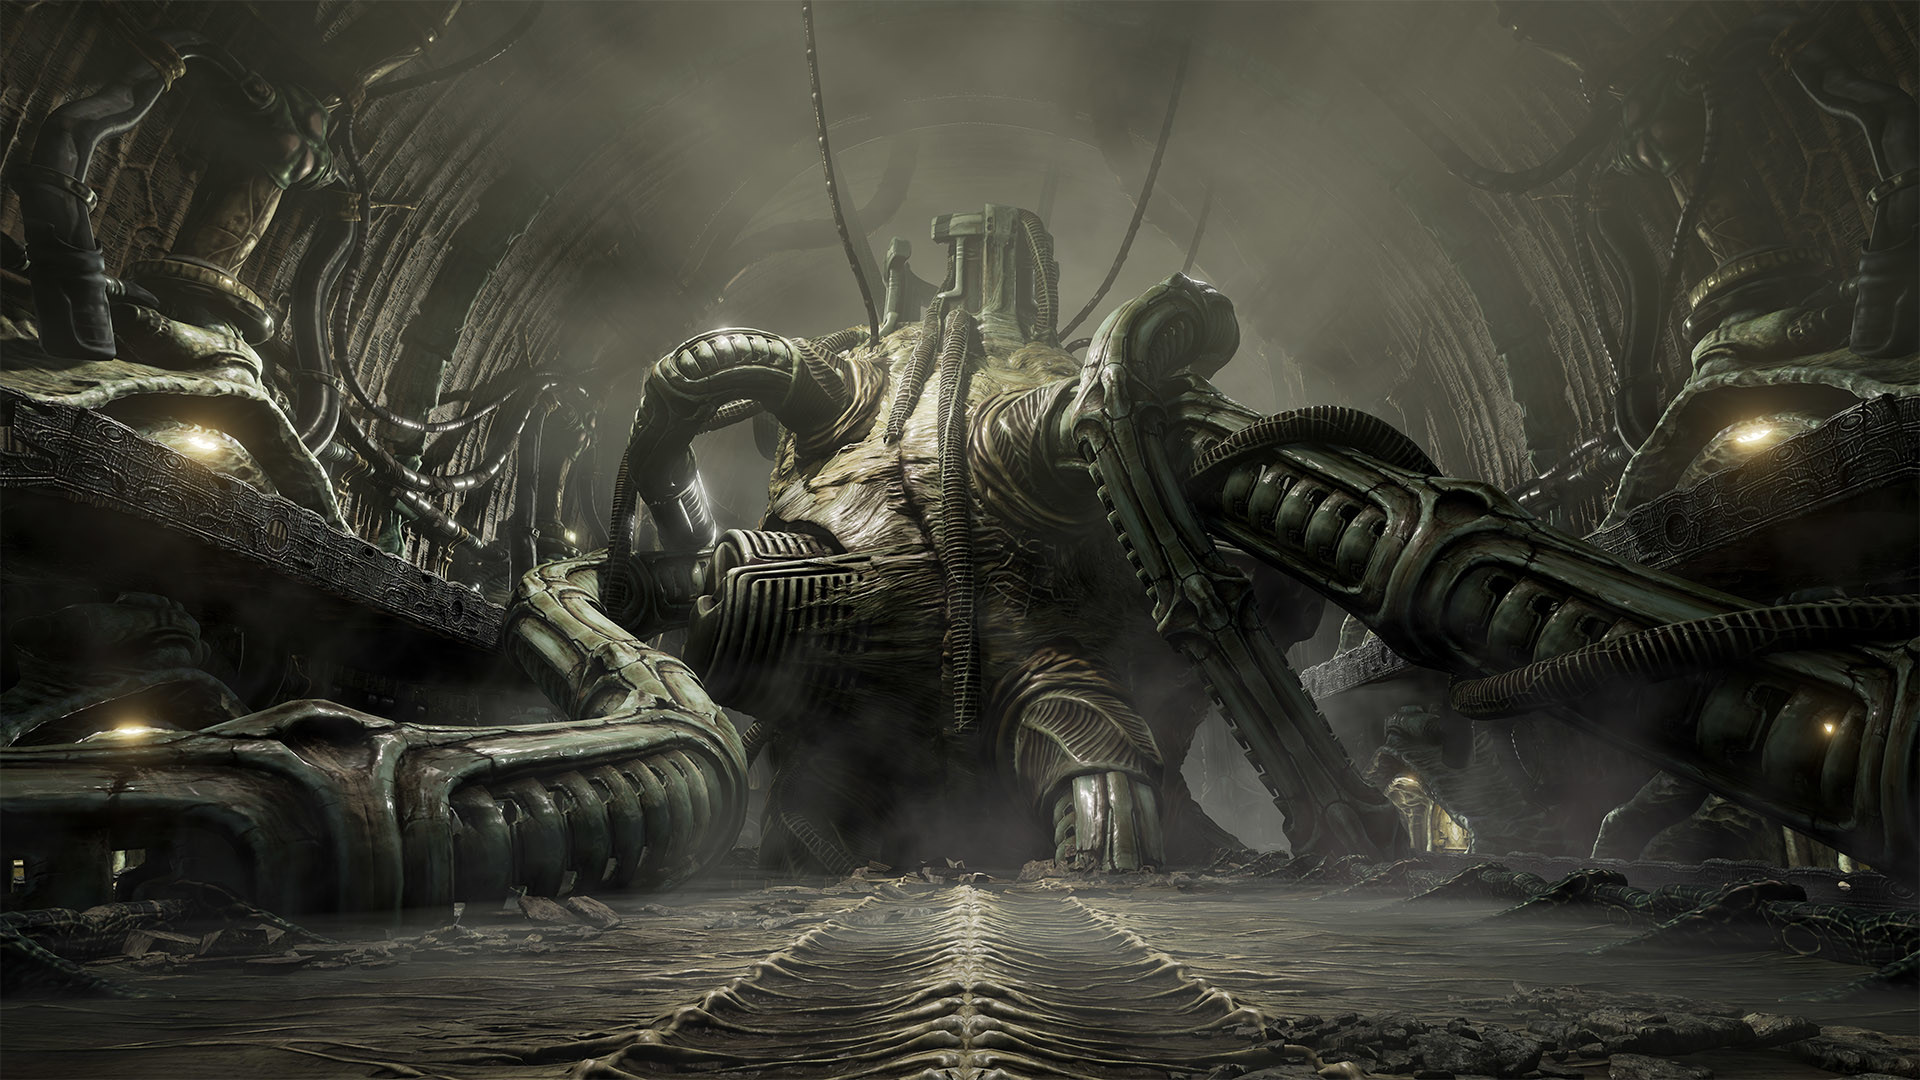 Giger Inspired Horror Game Scorn Comes To Steam Greenlight - Scorn Game - HD Wallpaper 